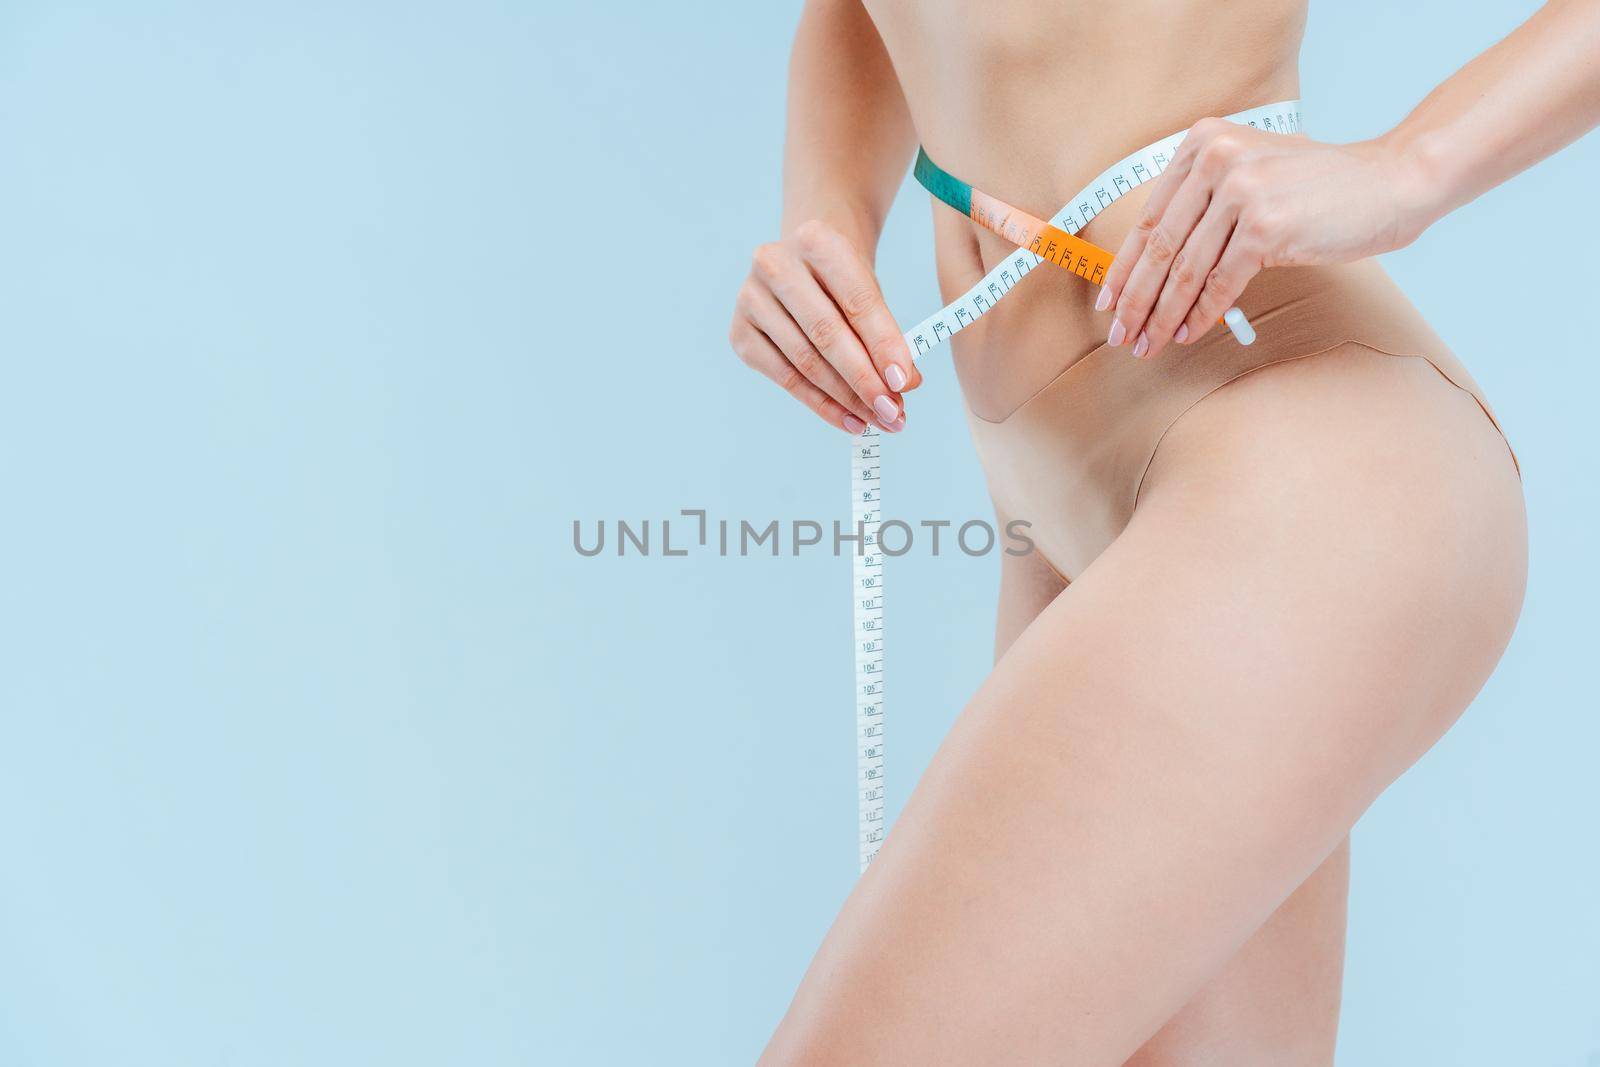 Very slim woman measuring her waist with tape measure, torso to be seen